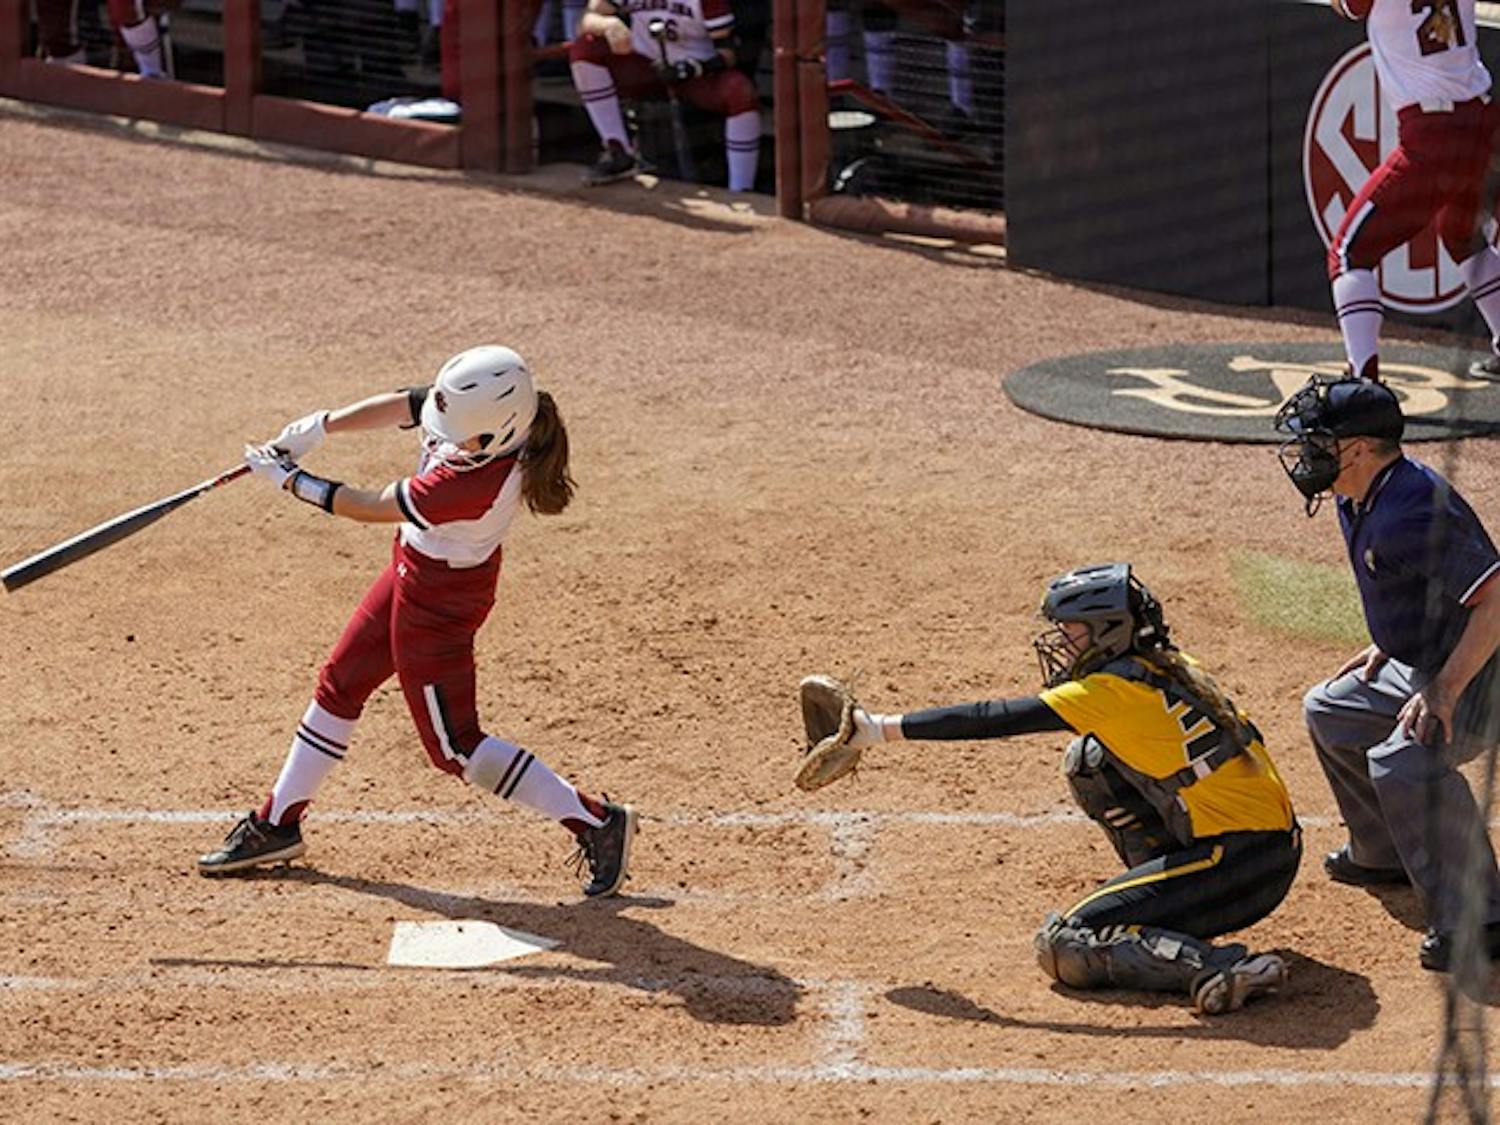 A South Carolina softball player swings the bat at a pitch thrown by the Missouri pitcher.